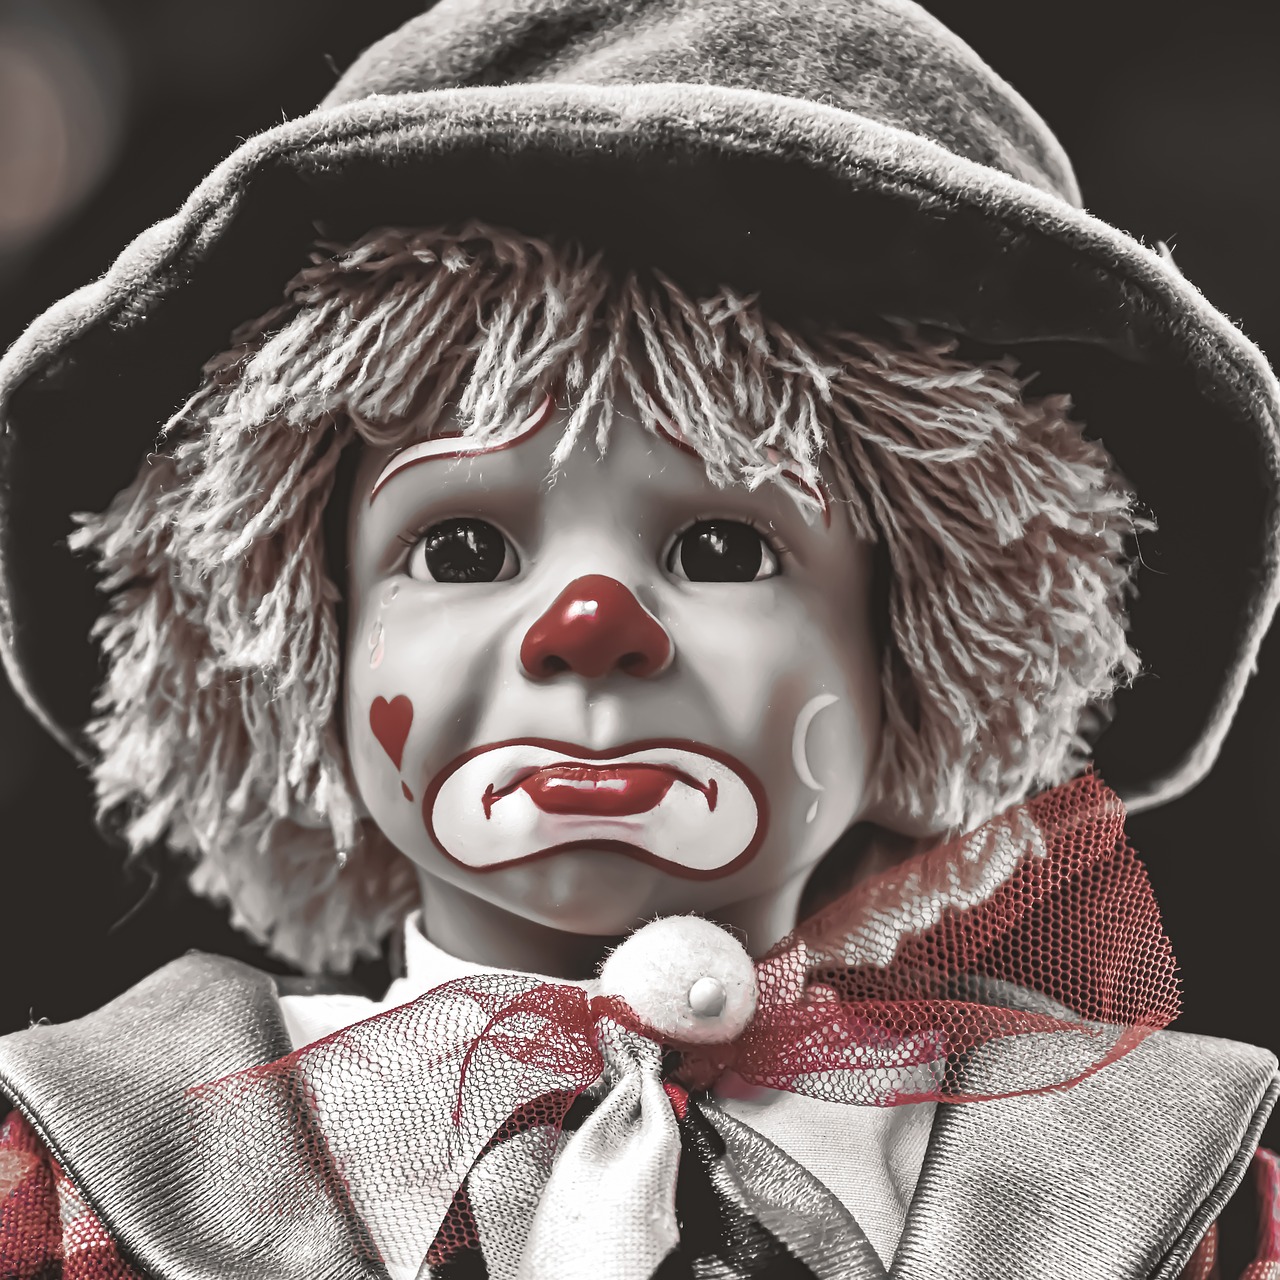 a black and white photo of a clown doll, a portrait, by Edward Corbett, trending on pixabay, coloured, hurt, closeup of an adorable, realistic image